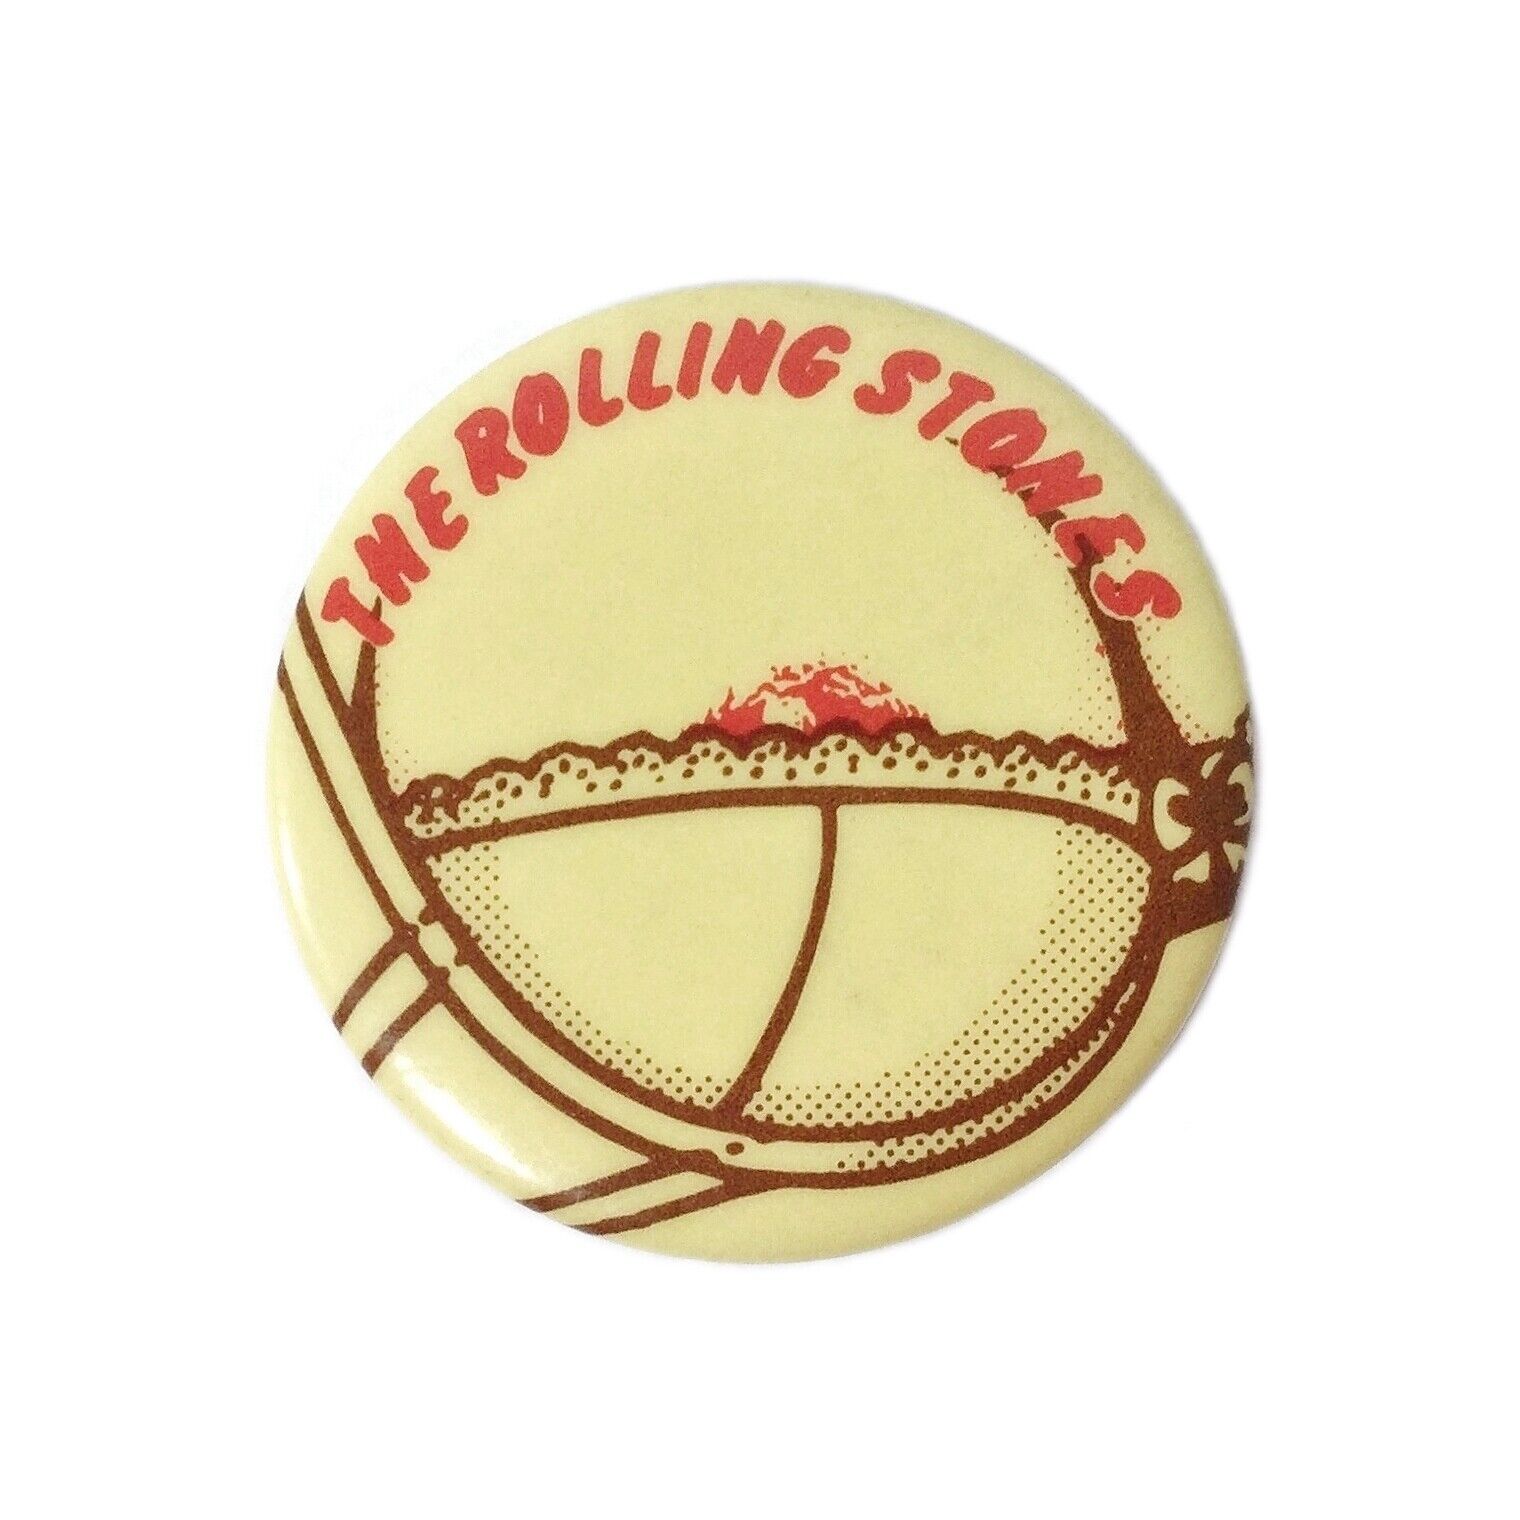 vtg 70S ROLLING STONES SOME GIRLS BAND PROMO PIN JACKET T SHIRT HAT BUTTON BADGE